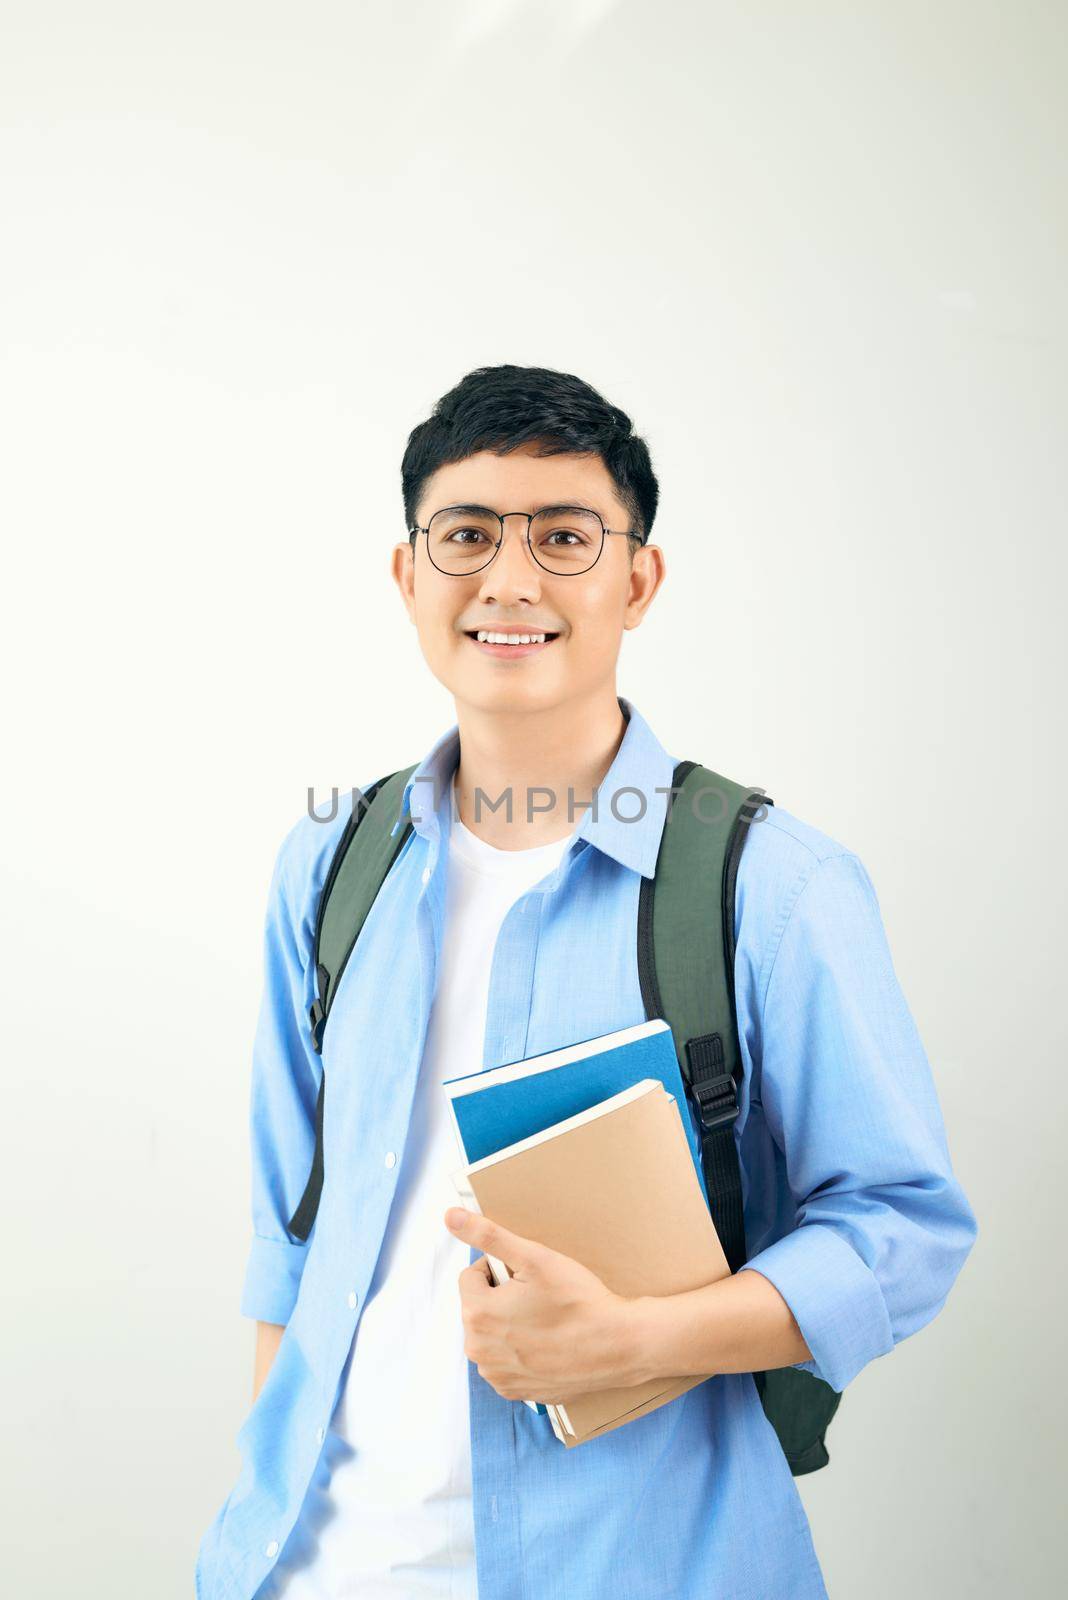 Handsome young student smiling and holding a notebook, isolated on white background by makidotvn